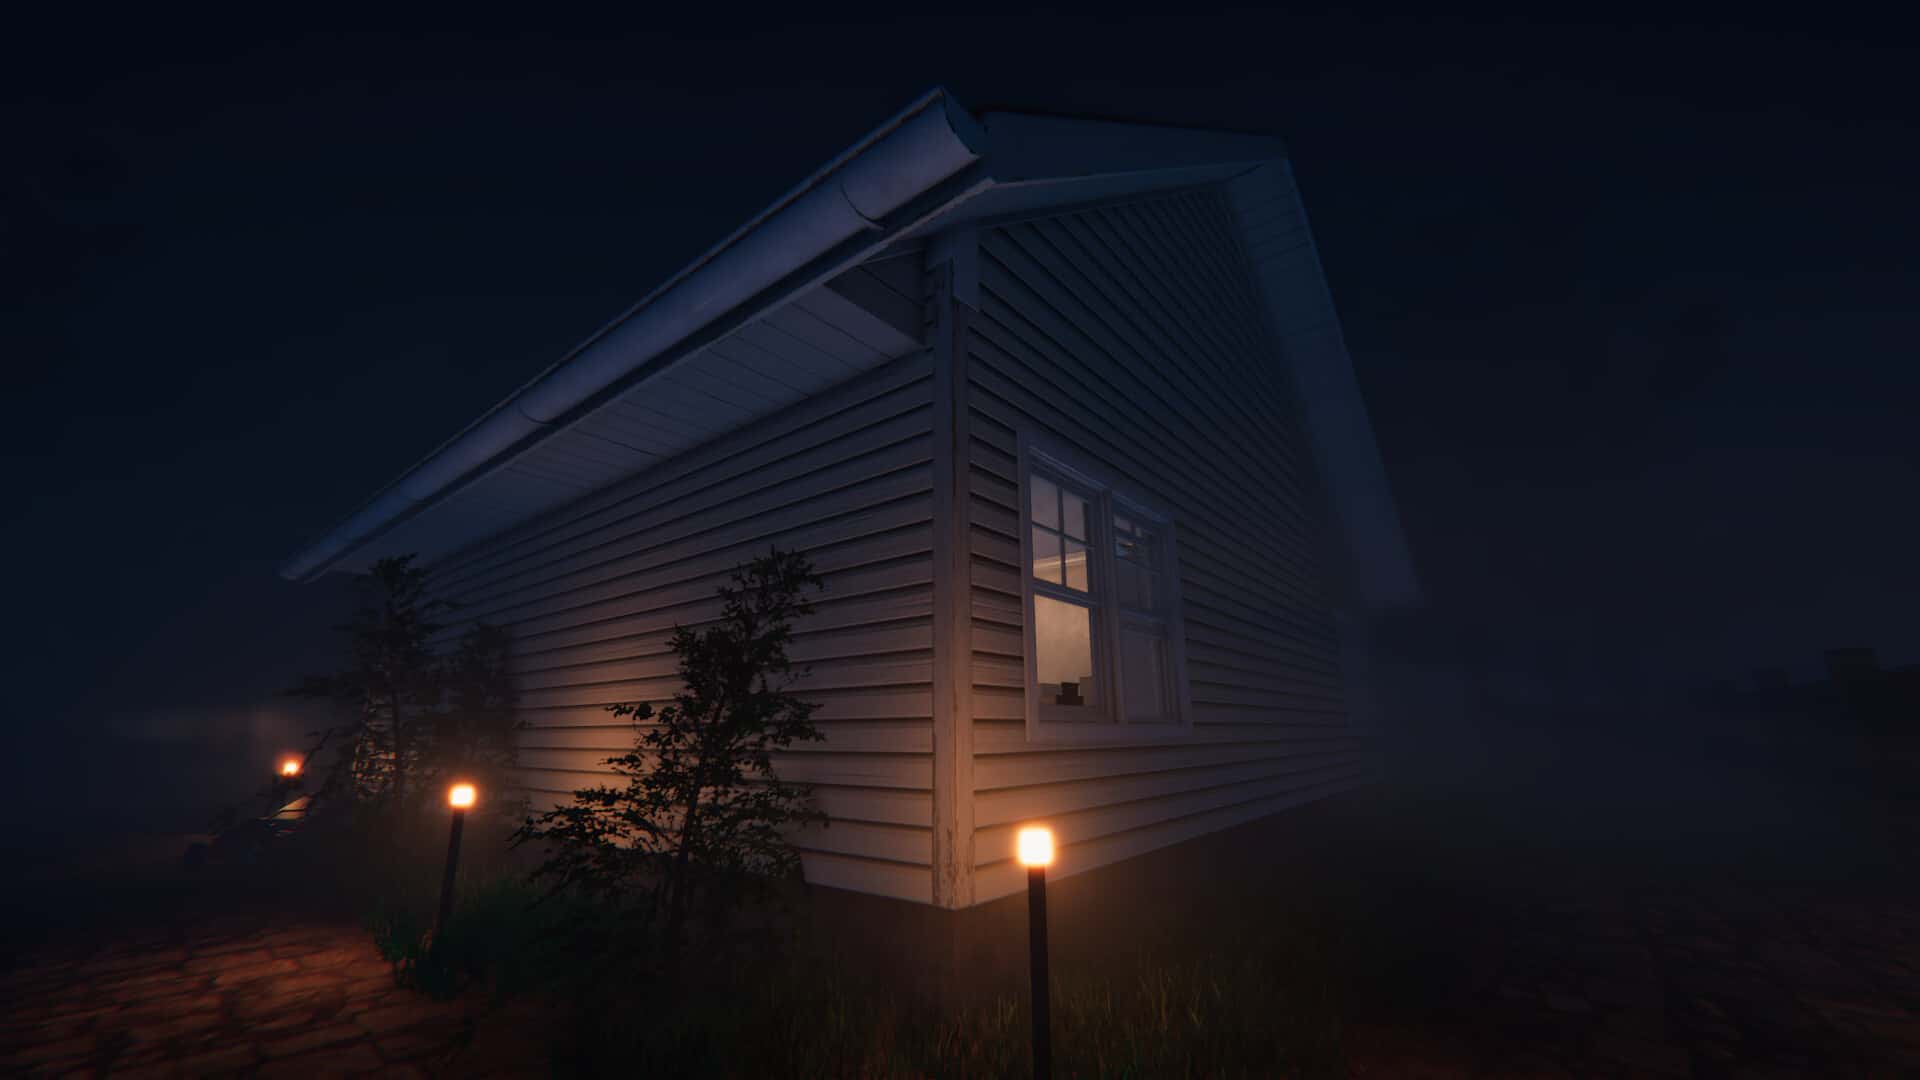 The haunted house from the game, 9 Childs Street (Credits: N4bA)